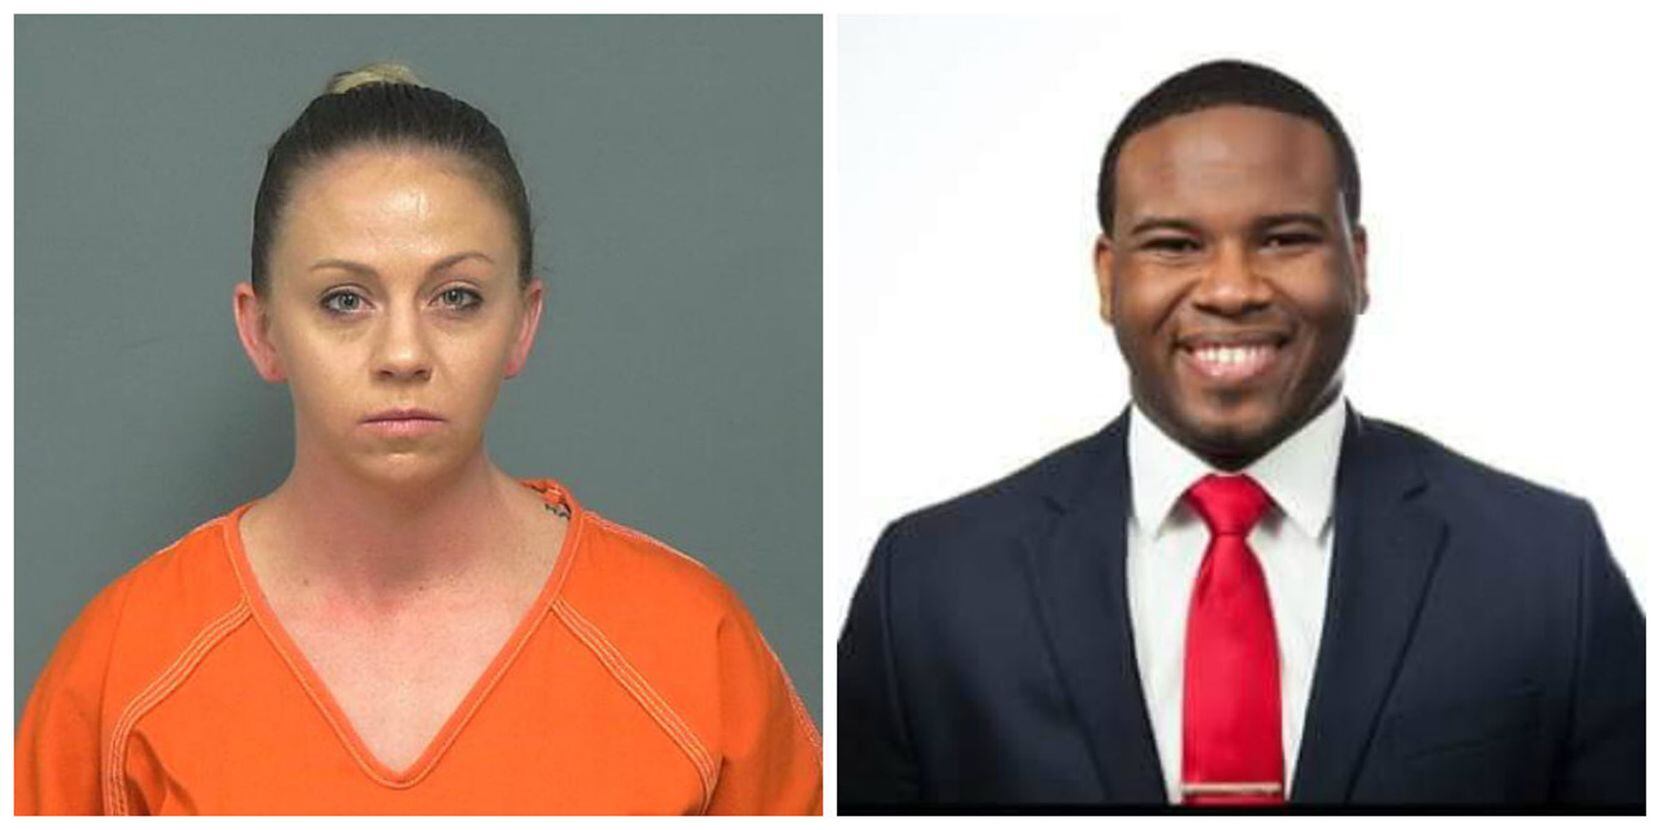 The jury selection begins Friday for the murder trial of Amber Guyger in the case of Botham Jean's shooting death. The trial is to begin on September 23rd.